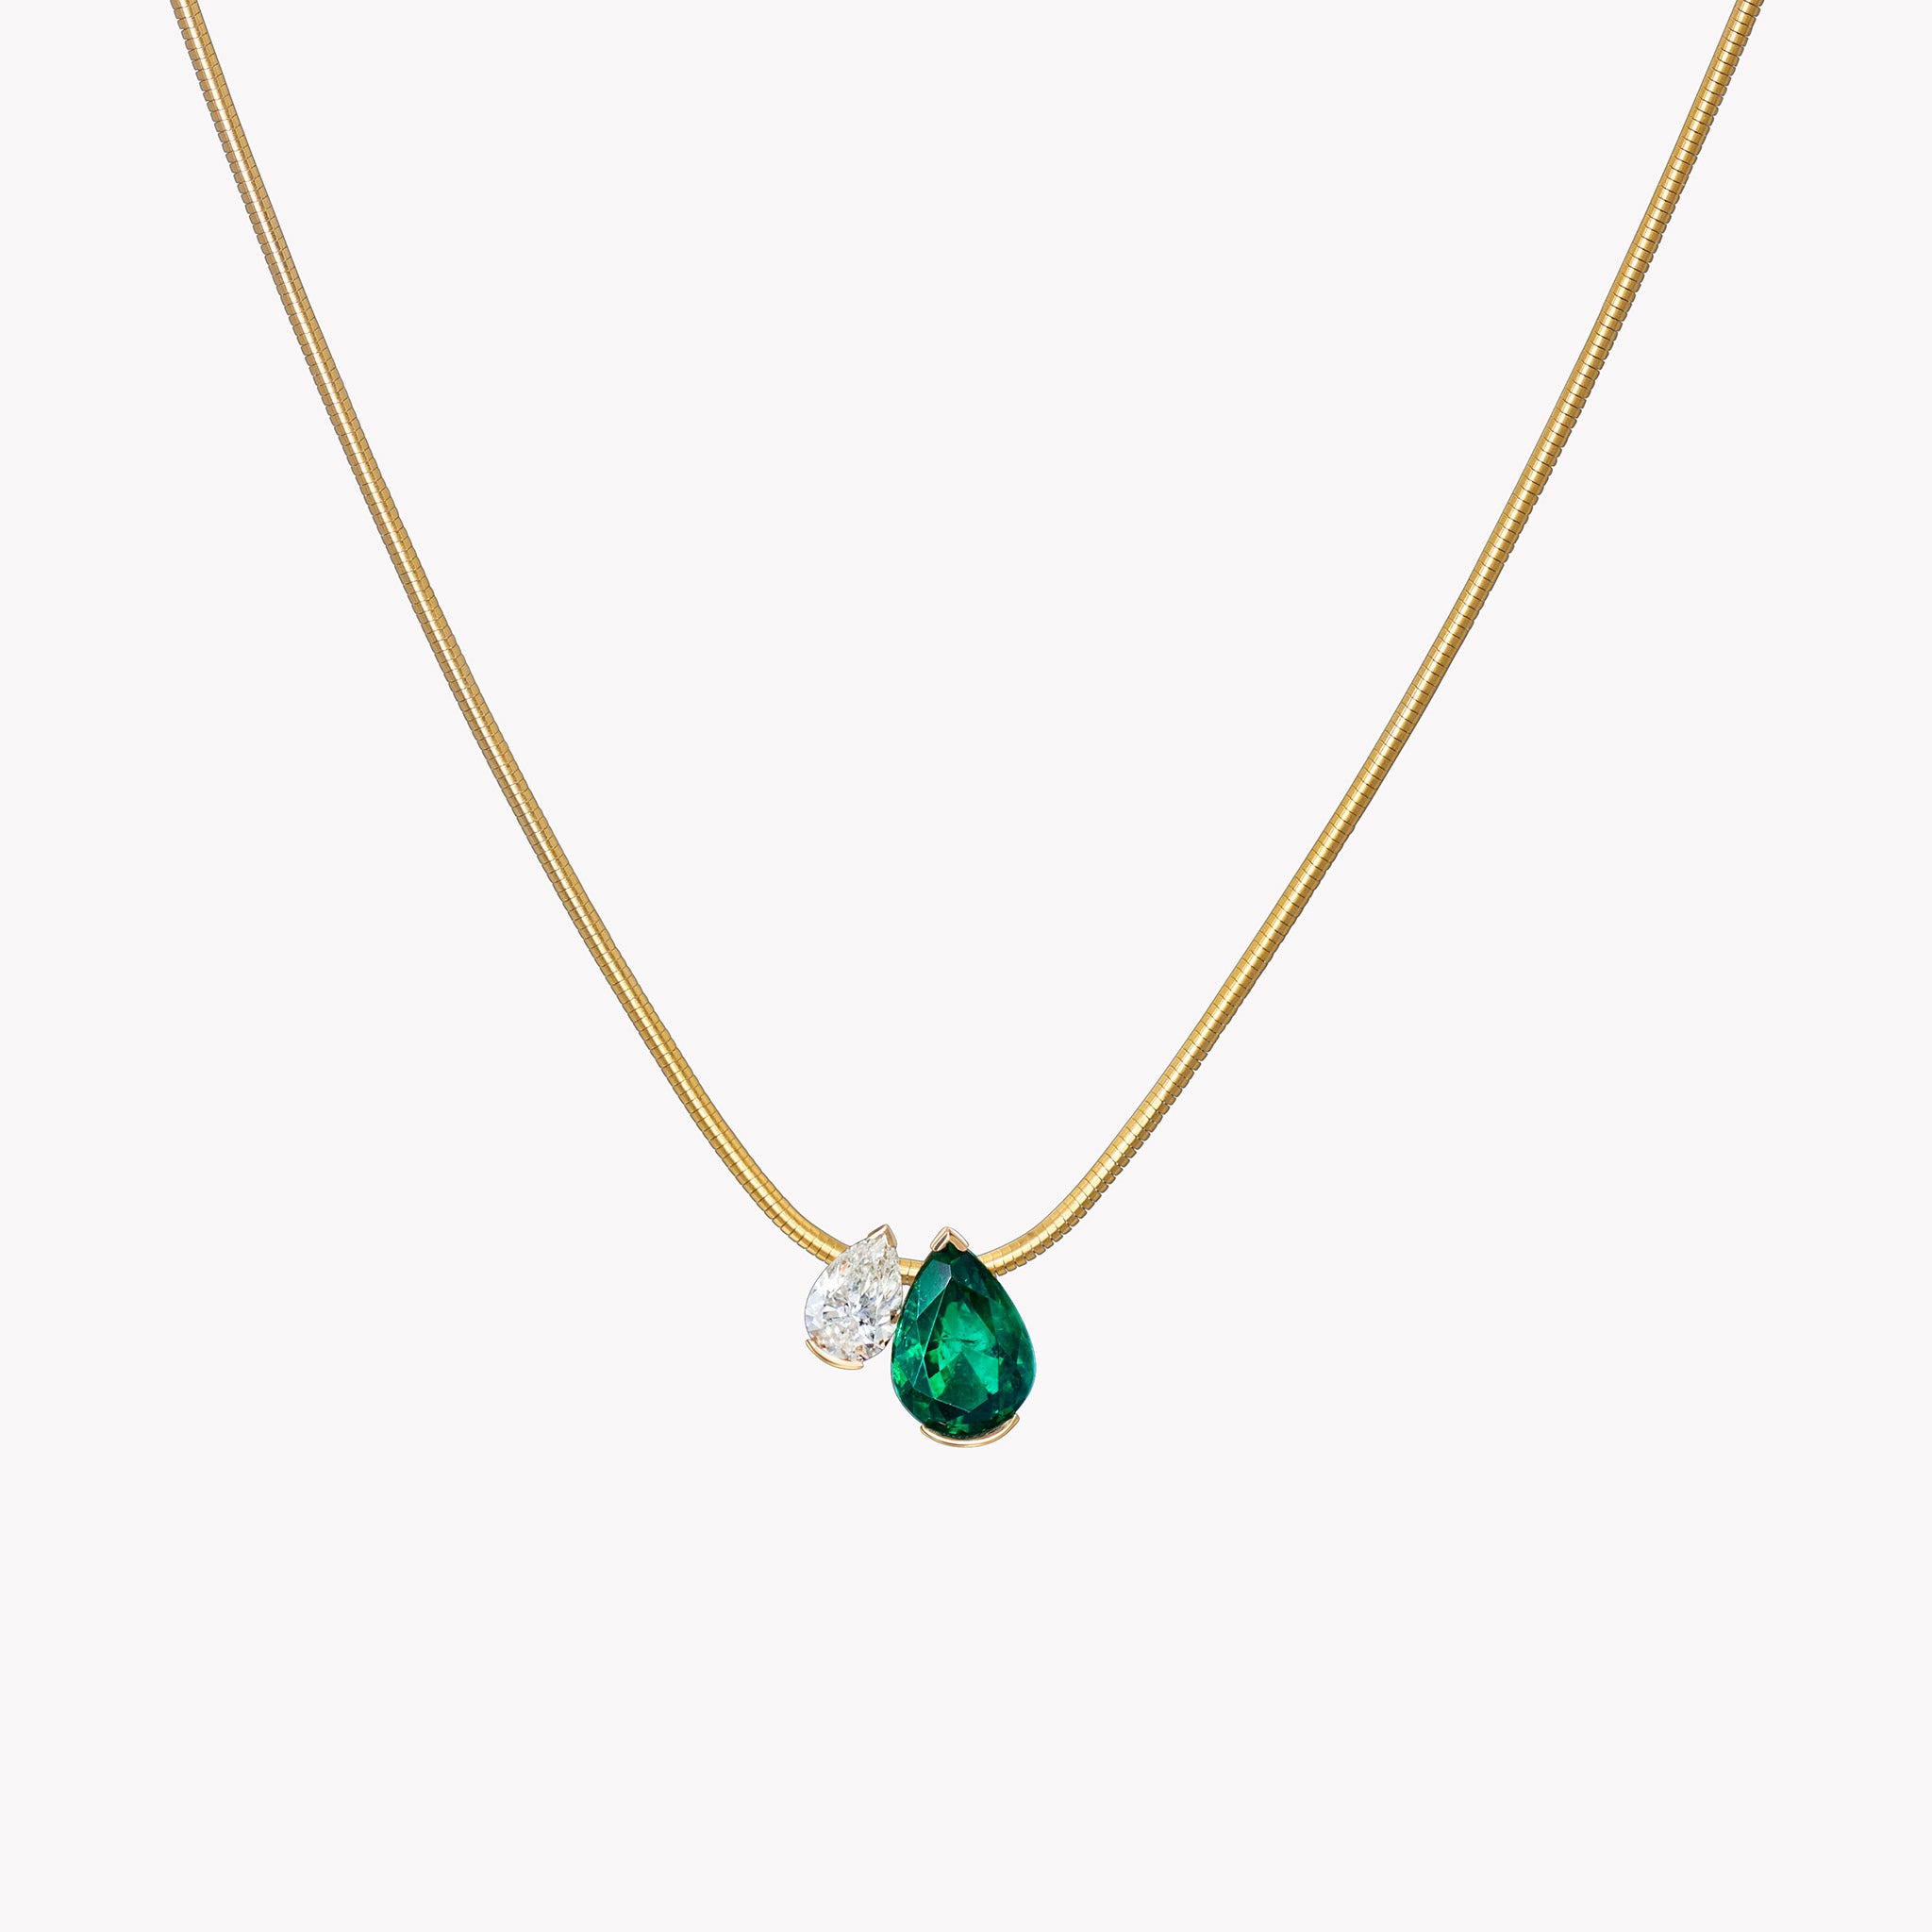 The Emerald Muse Duo Pendant